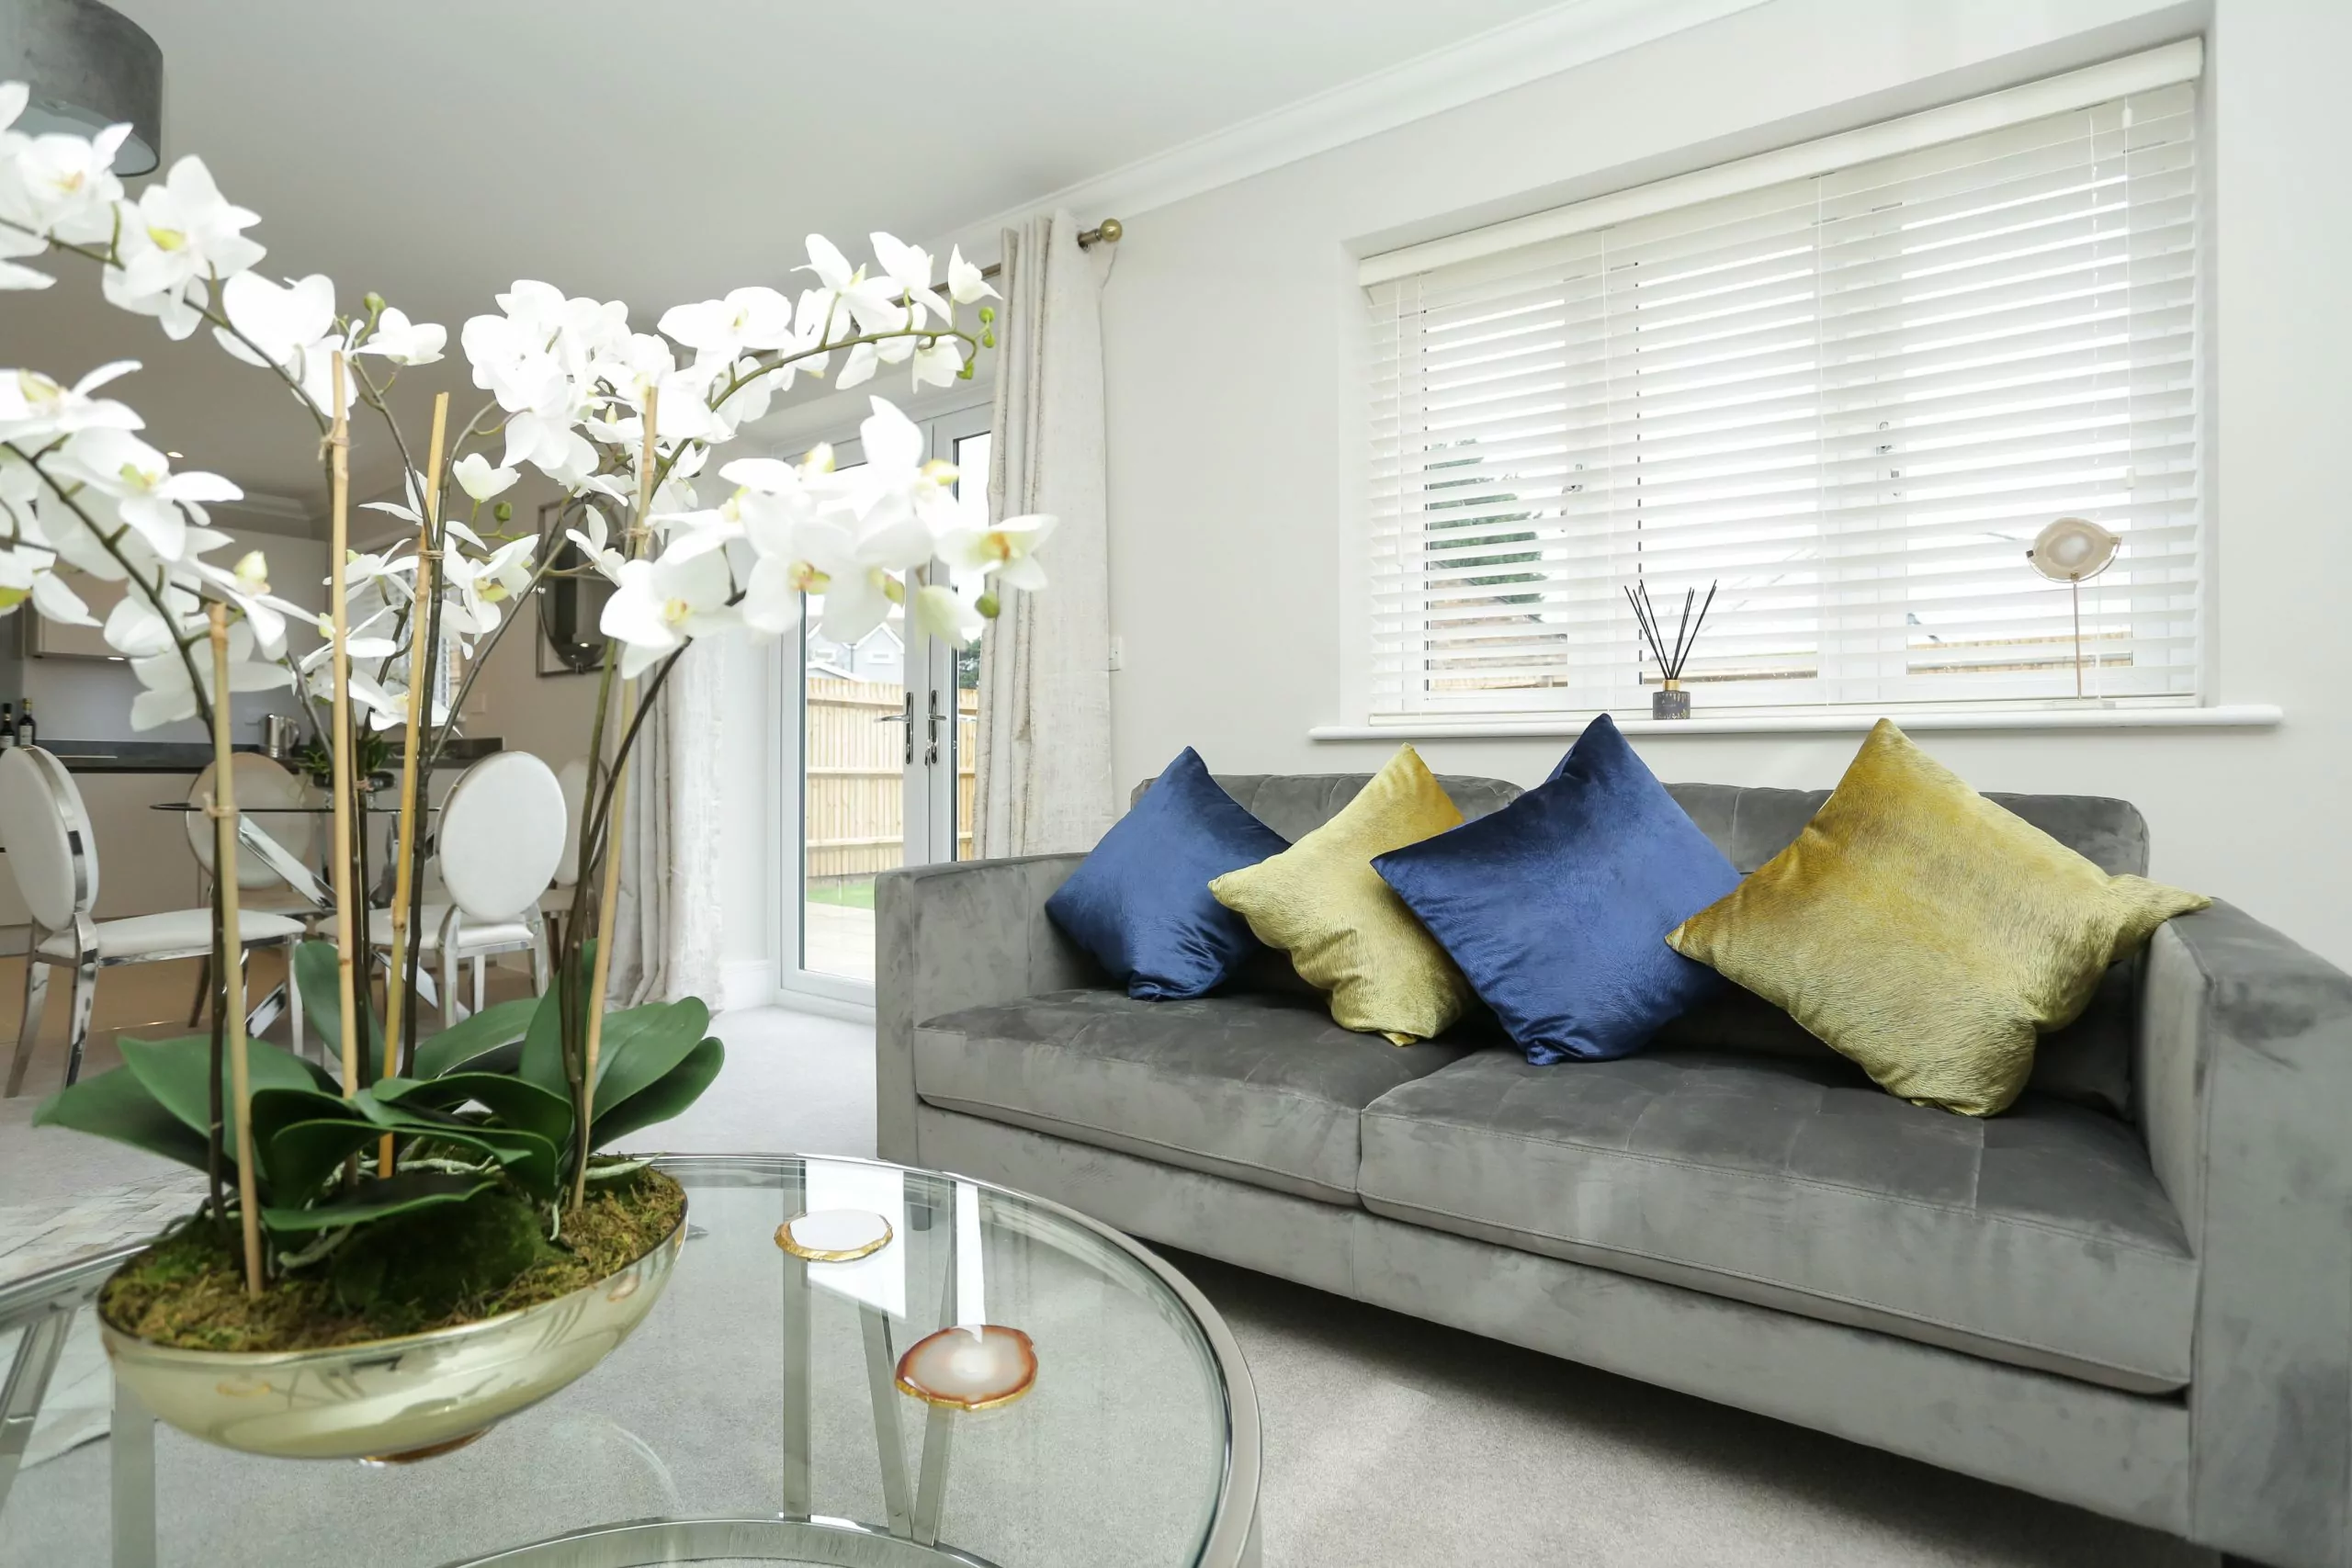 Living room at our Mulberry place development